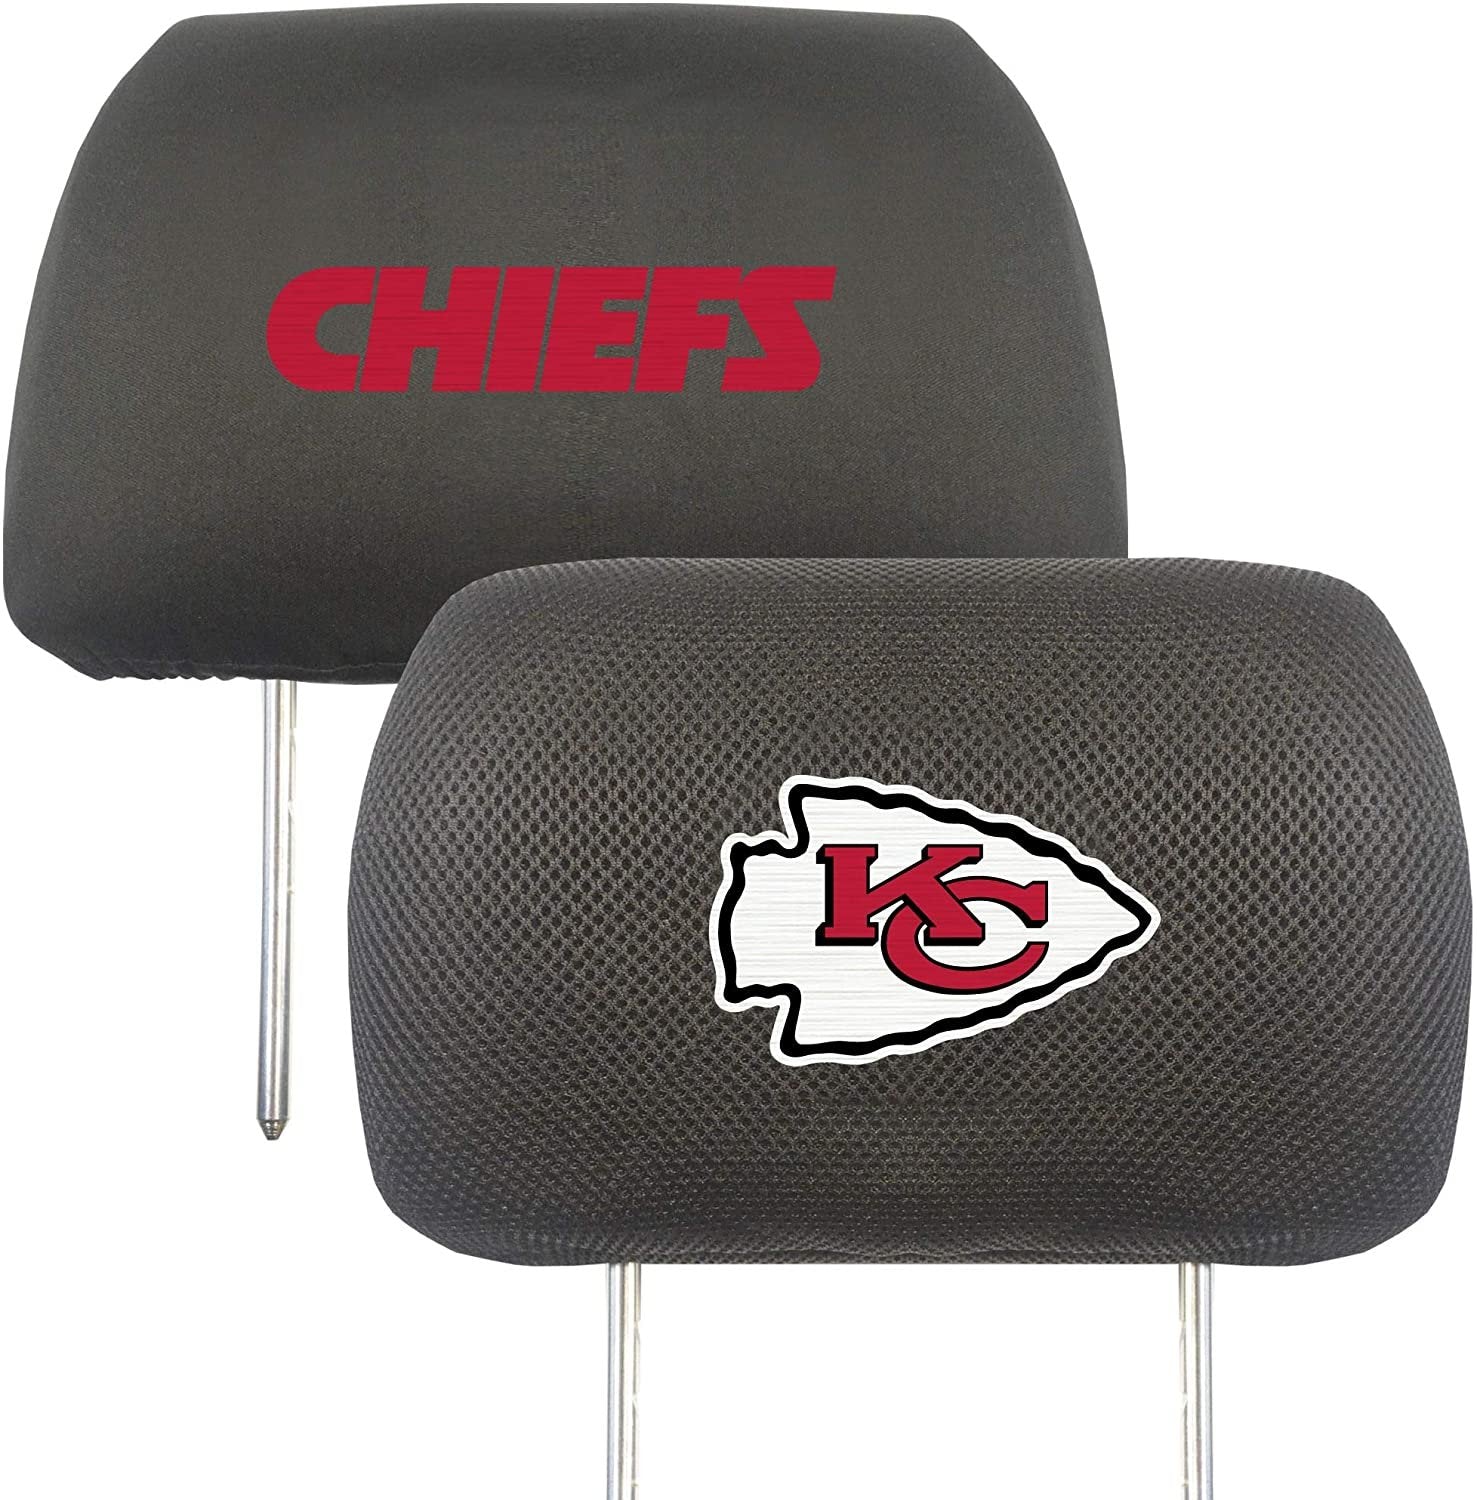 Kansas City Chiefs Pair of Premium Auto Head Rest Covers, Embroidered, Black Elastic, 14x10 Inch